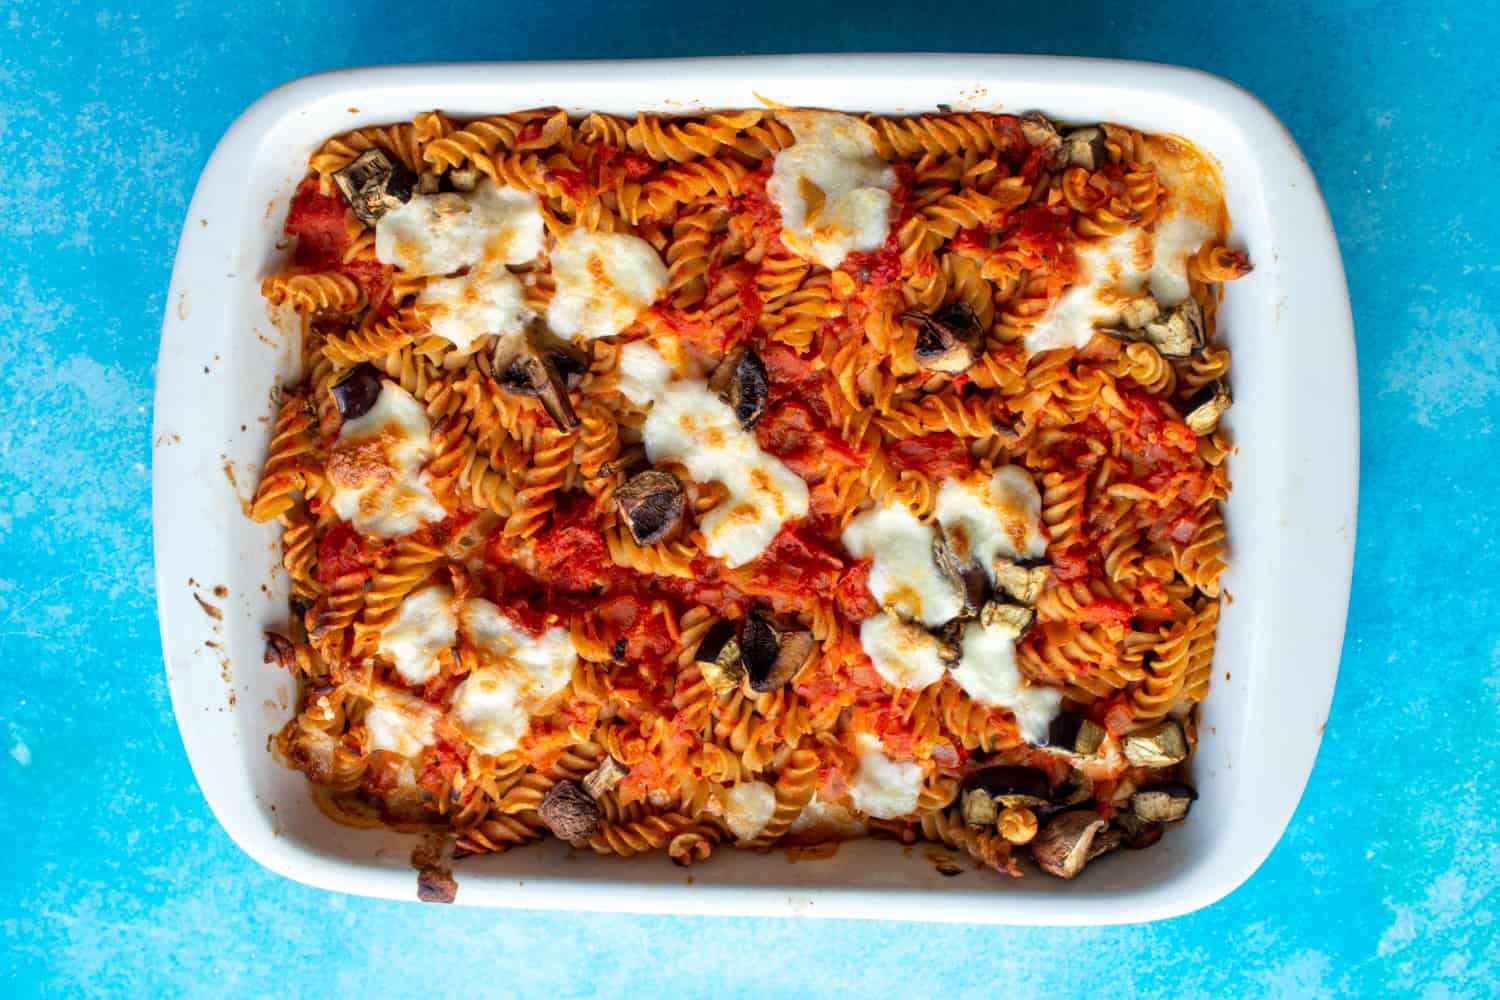 Healthy Baked Ziti with fusilli pasta, aubergine, tomato sauce, mushrooms and browned mozzarella in white baking dish on a blue background.